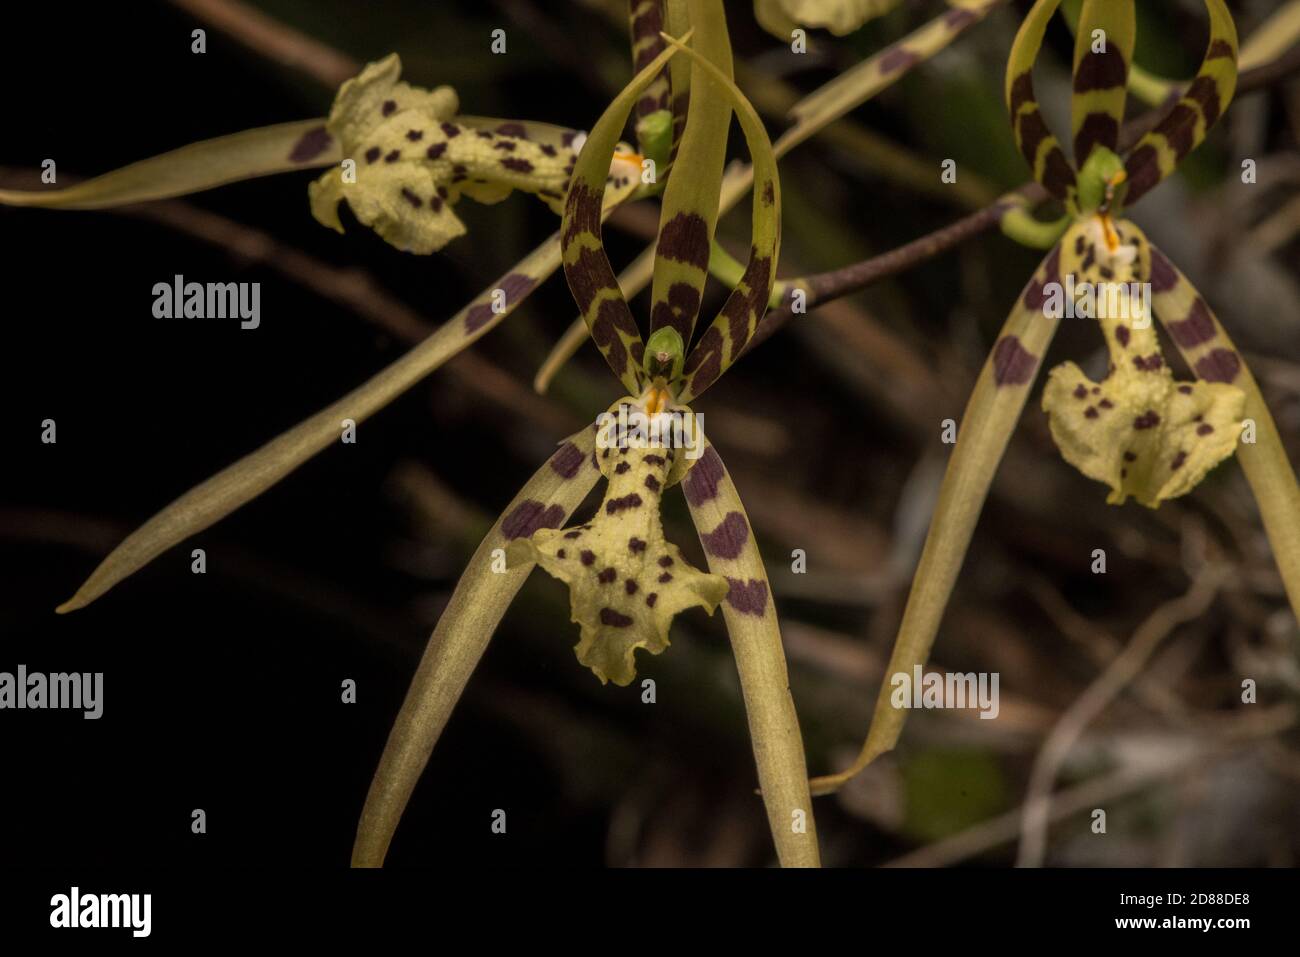 Blooming spider orchid (Brassia sp) from the Ecuadorian Amazon rainforest in South America. Stock Photo